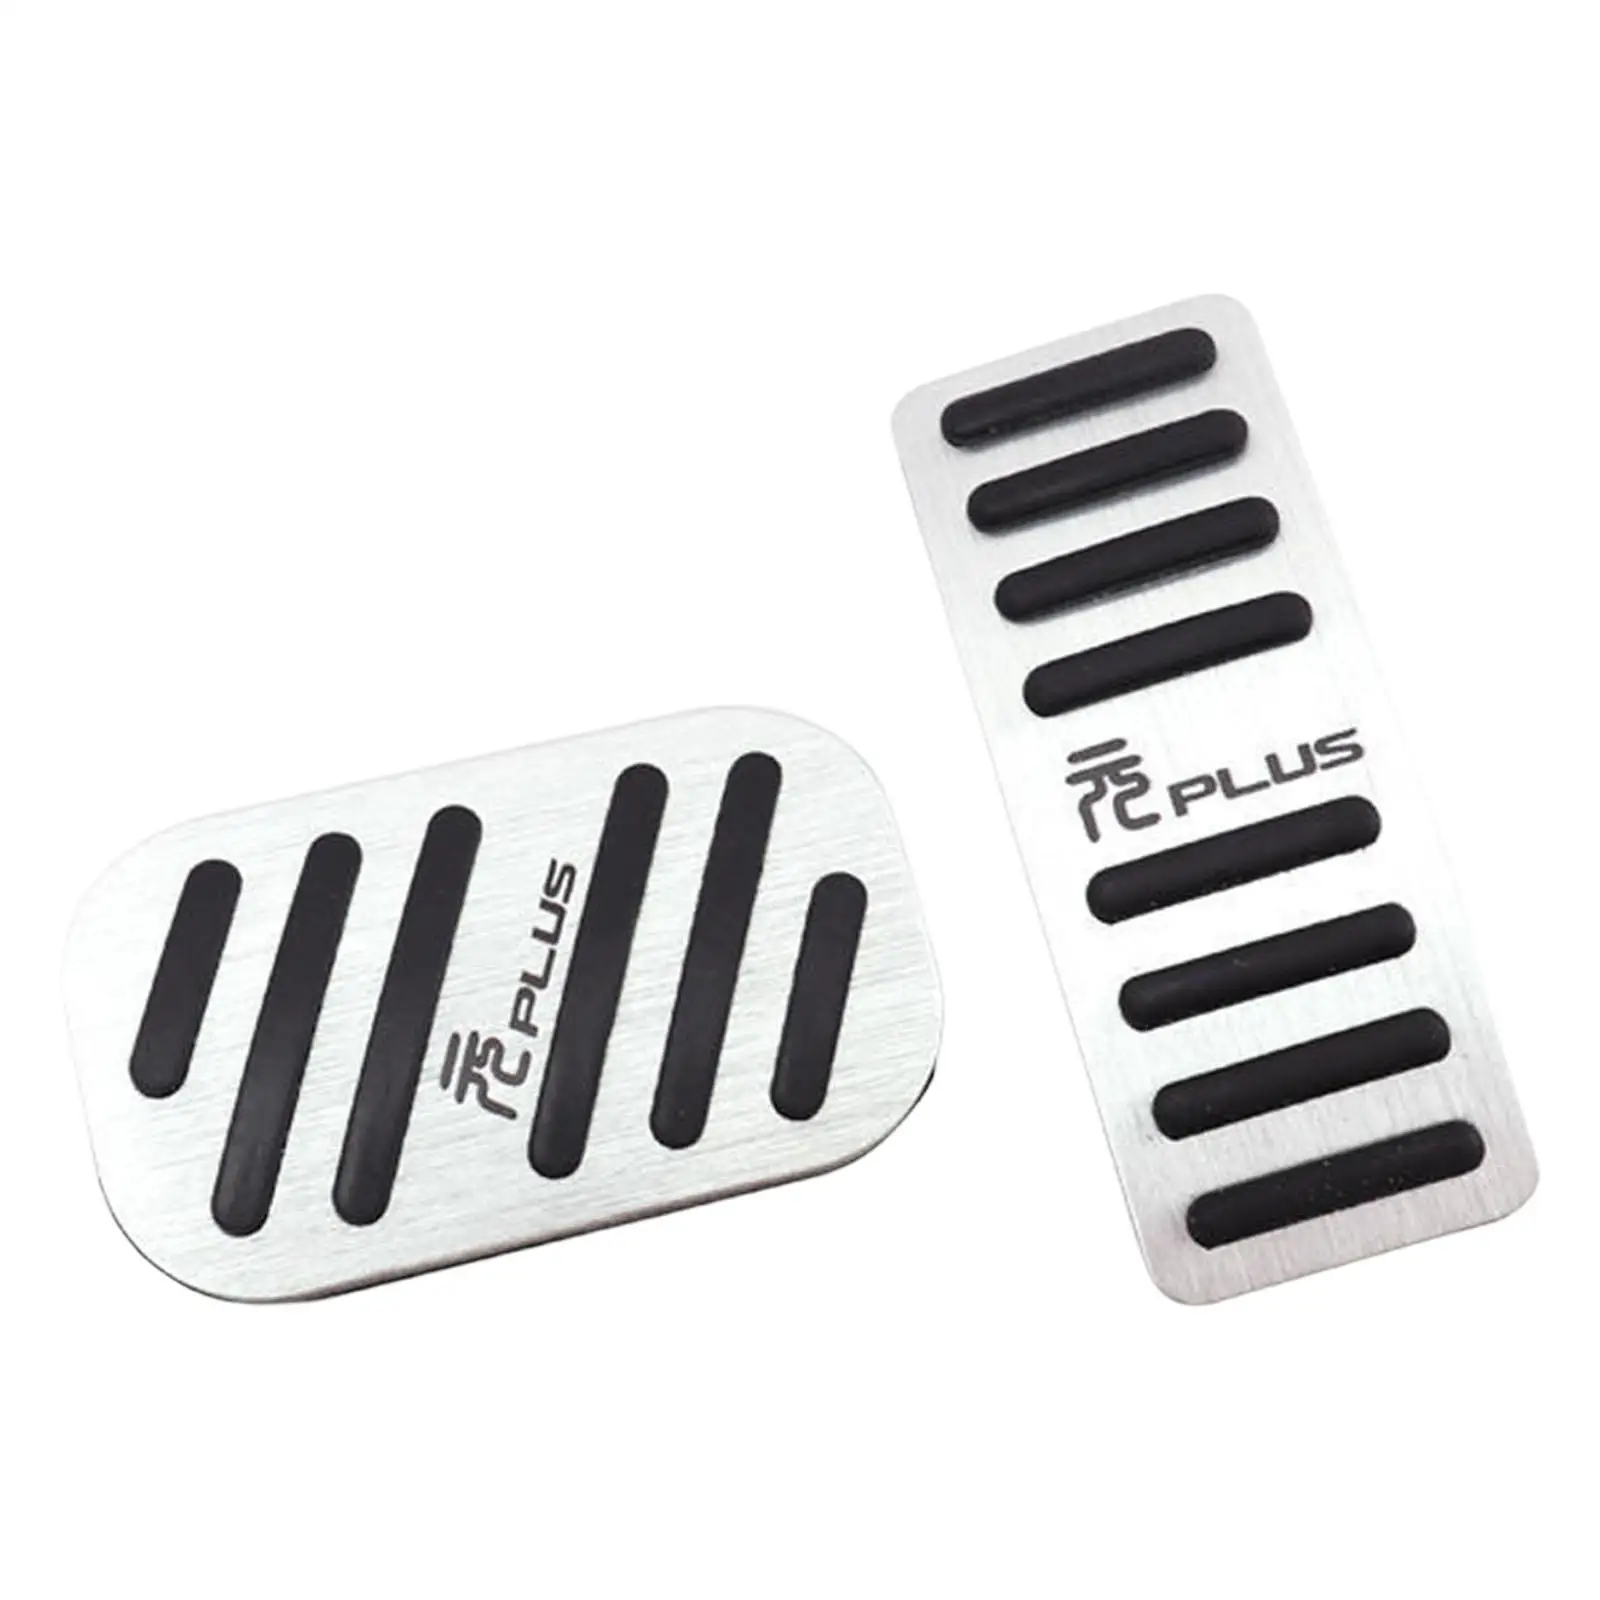 Gas Brake Pedal Cover Set Aluminium Alloy Wear Resistant Foot Pedals Pads for Byd Atto 3 Yuan Plus Direct Replaces Durable